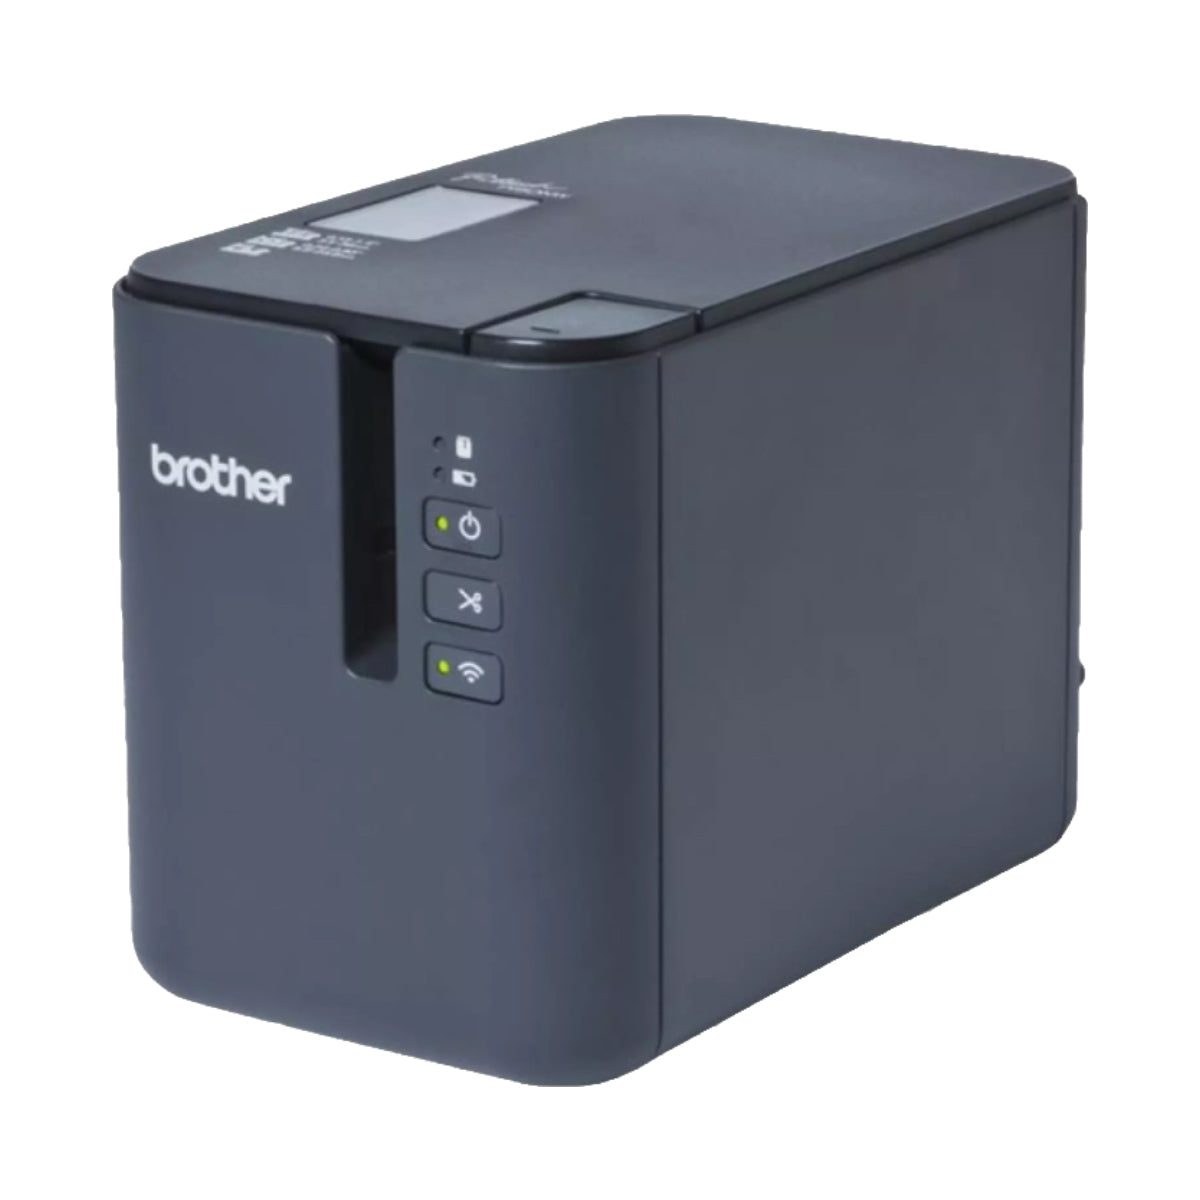 Brother P-touch PT-P900W Professional Label Printer with integrated Wi-Fi